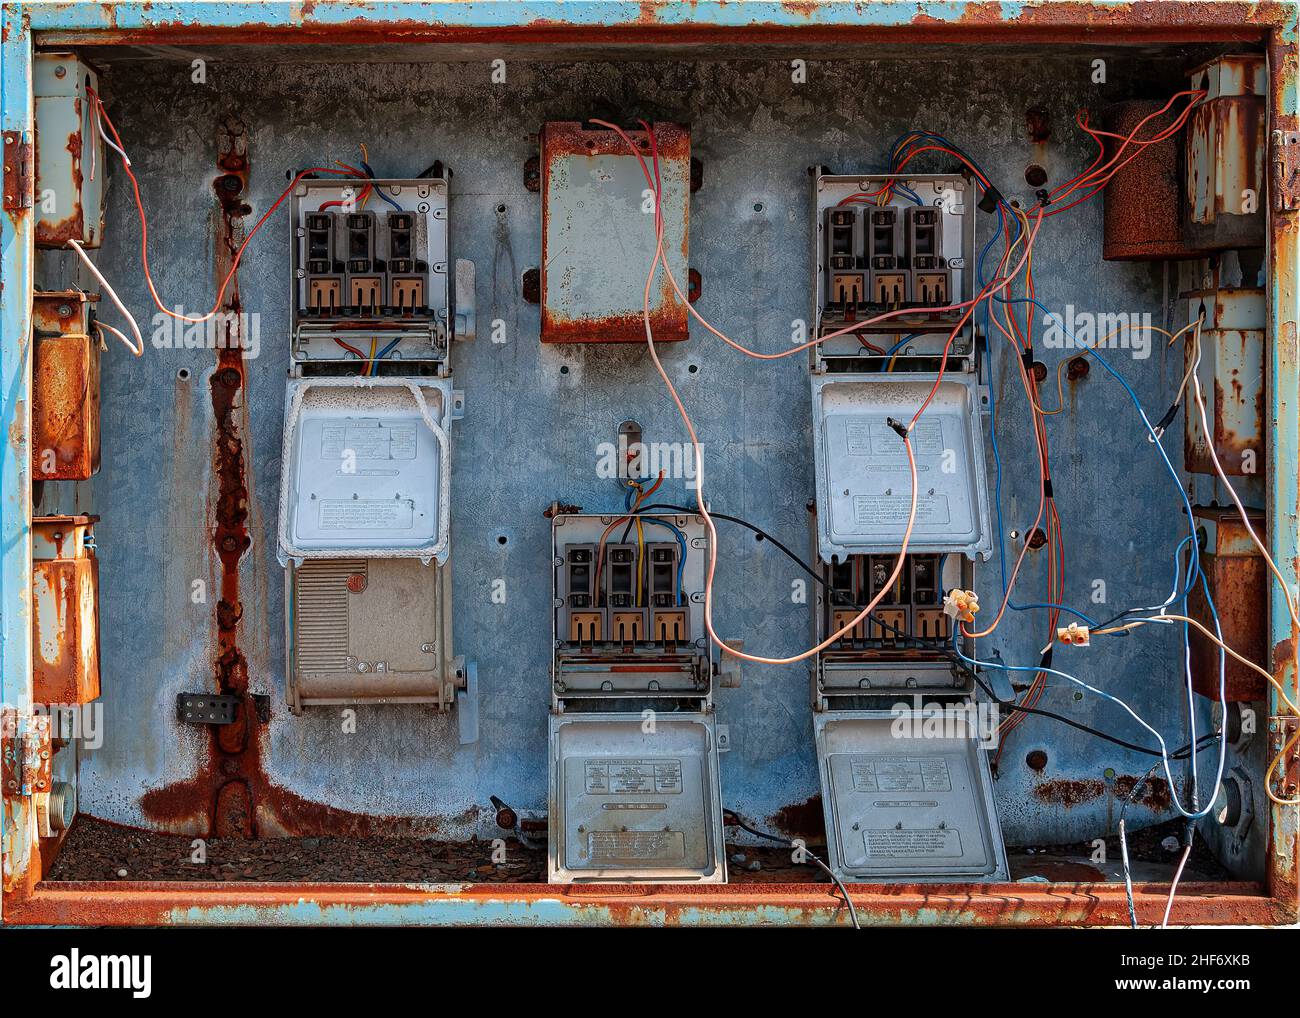 A broken fusebox from an abandoned industrial site. Stock Photo